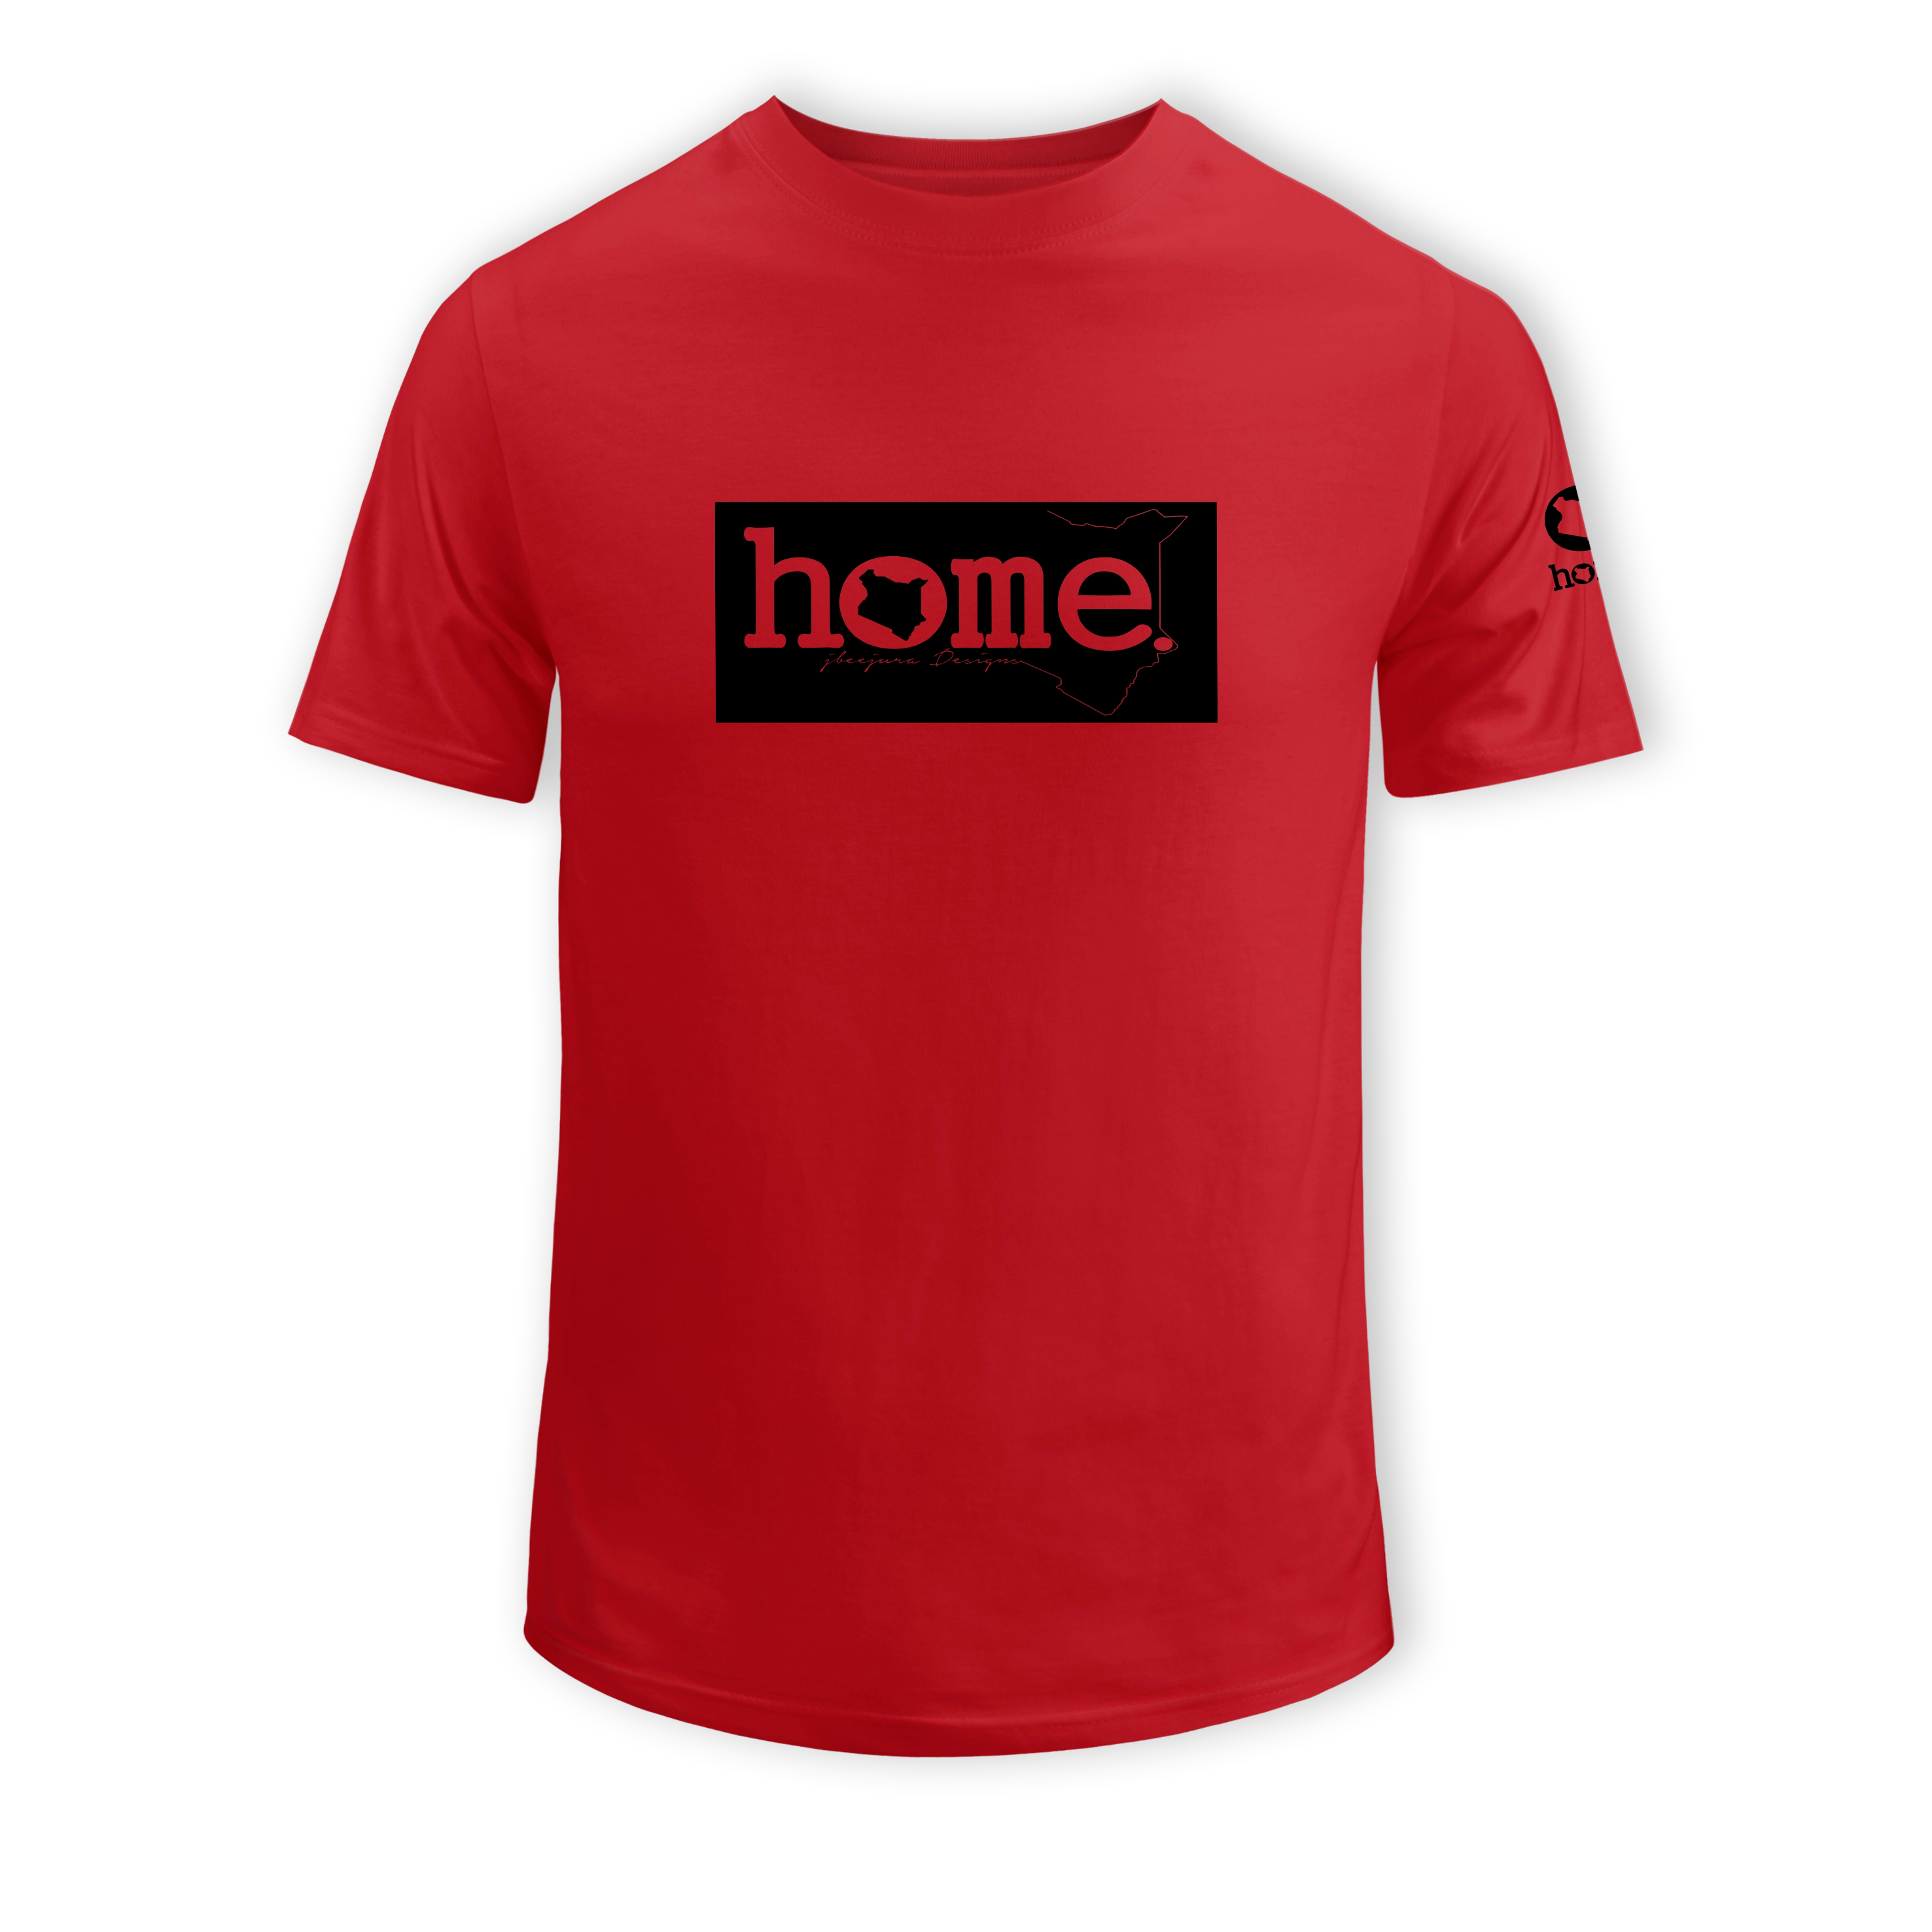 home_254 KIDS SHORT-SLEEVED RED T-SHIRT WITH A BLACK CLASSIC PRINT – COTTON PLUS FABRIC